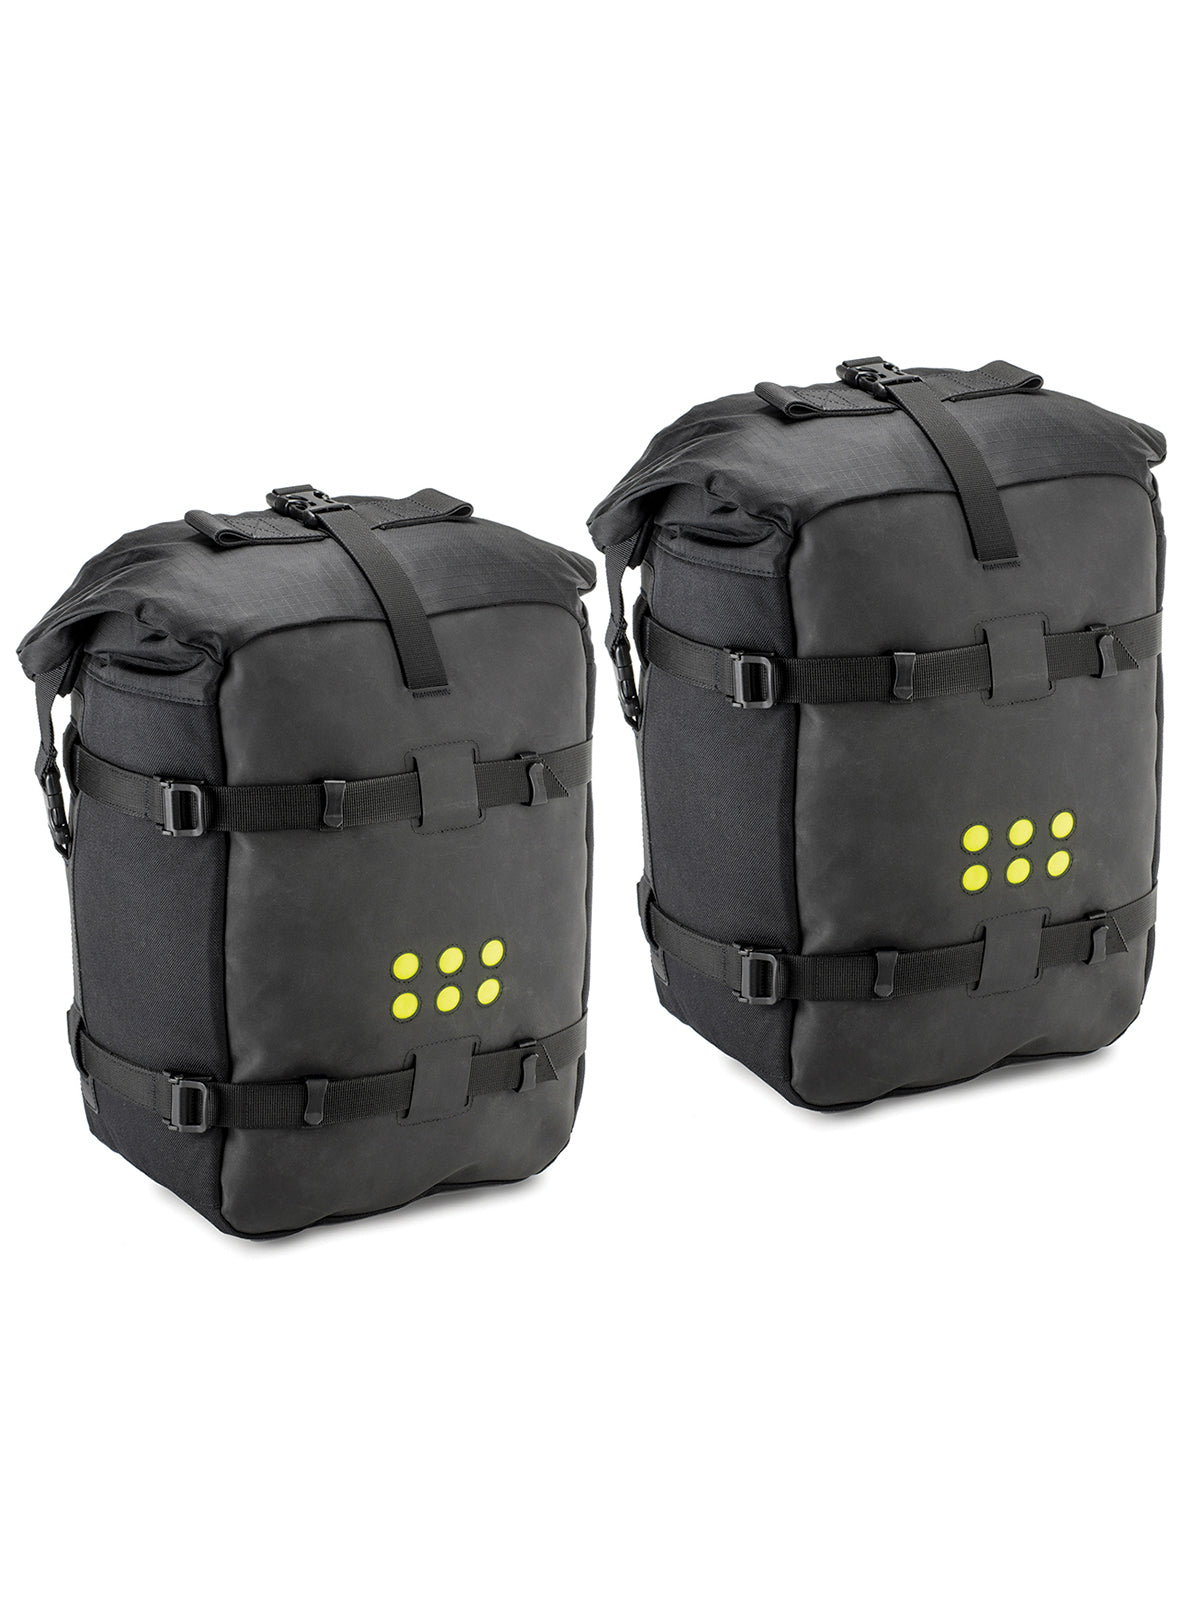 Two OS18 adventure packs